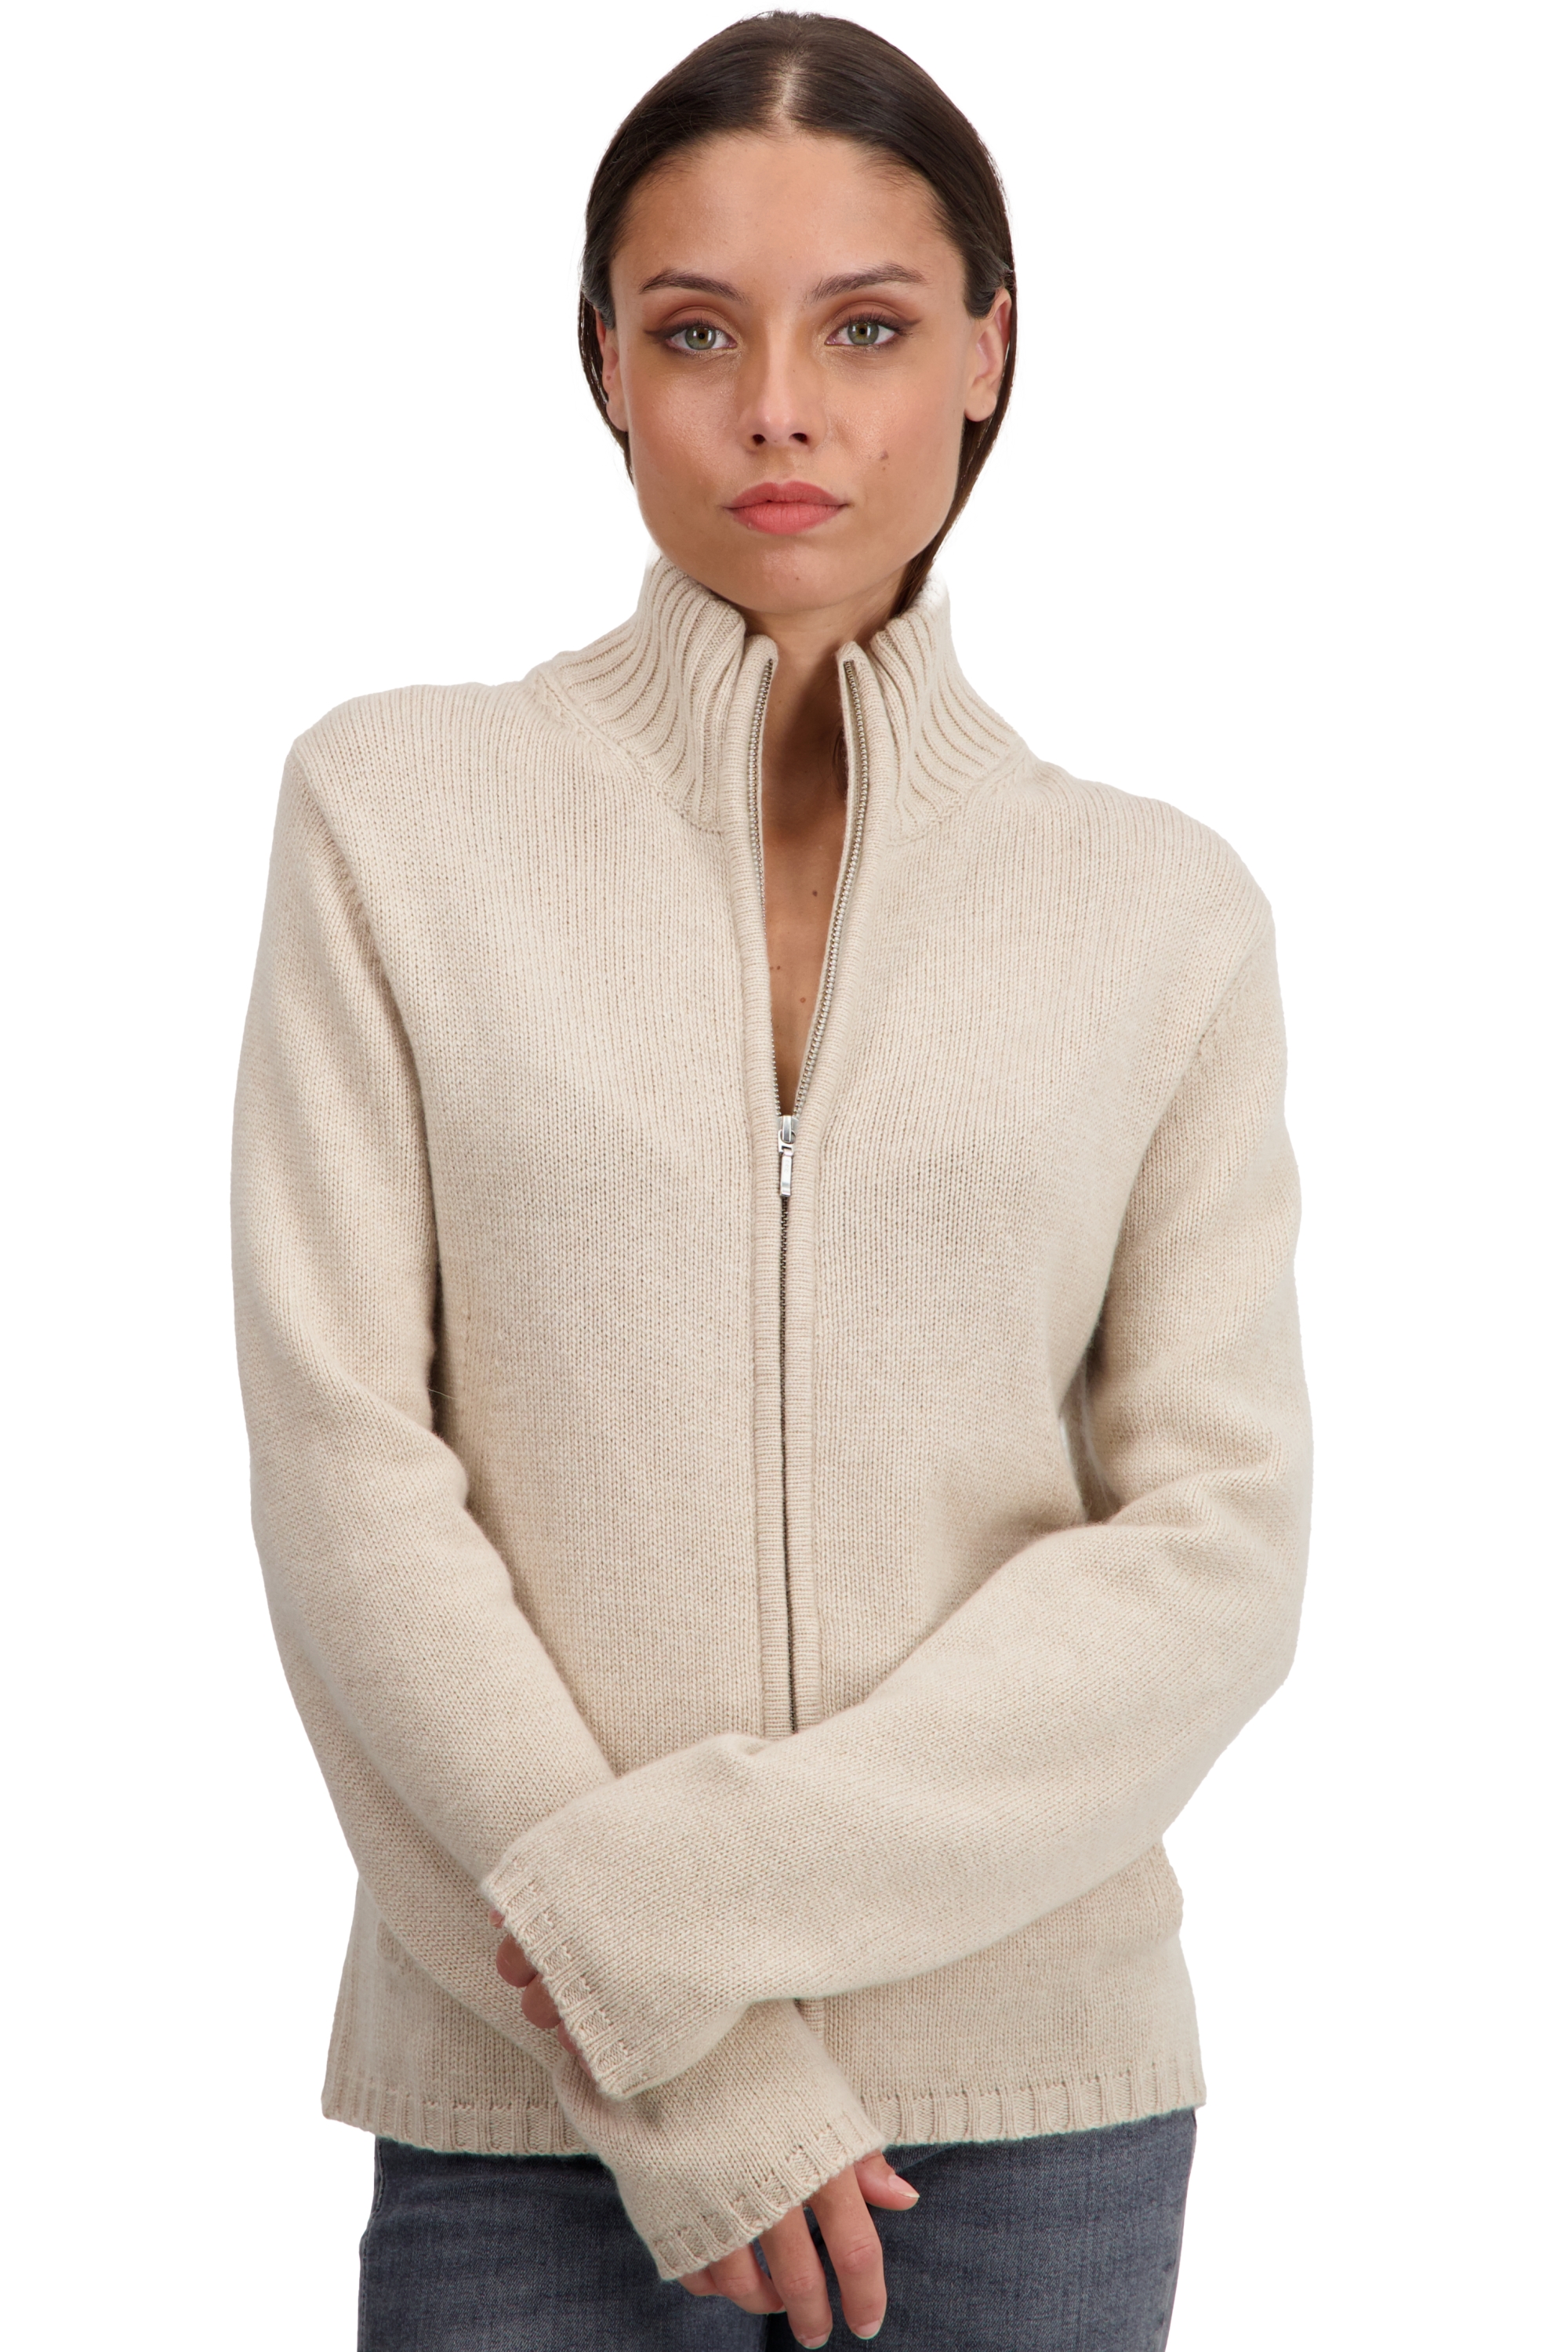 Cashmere ladies timeless classics elodie natural beige s